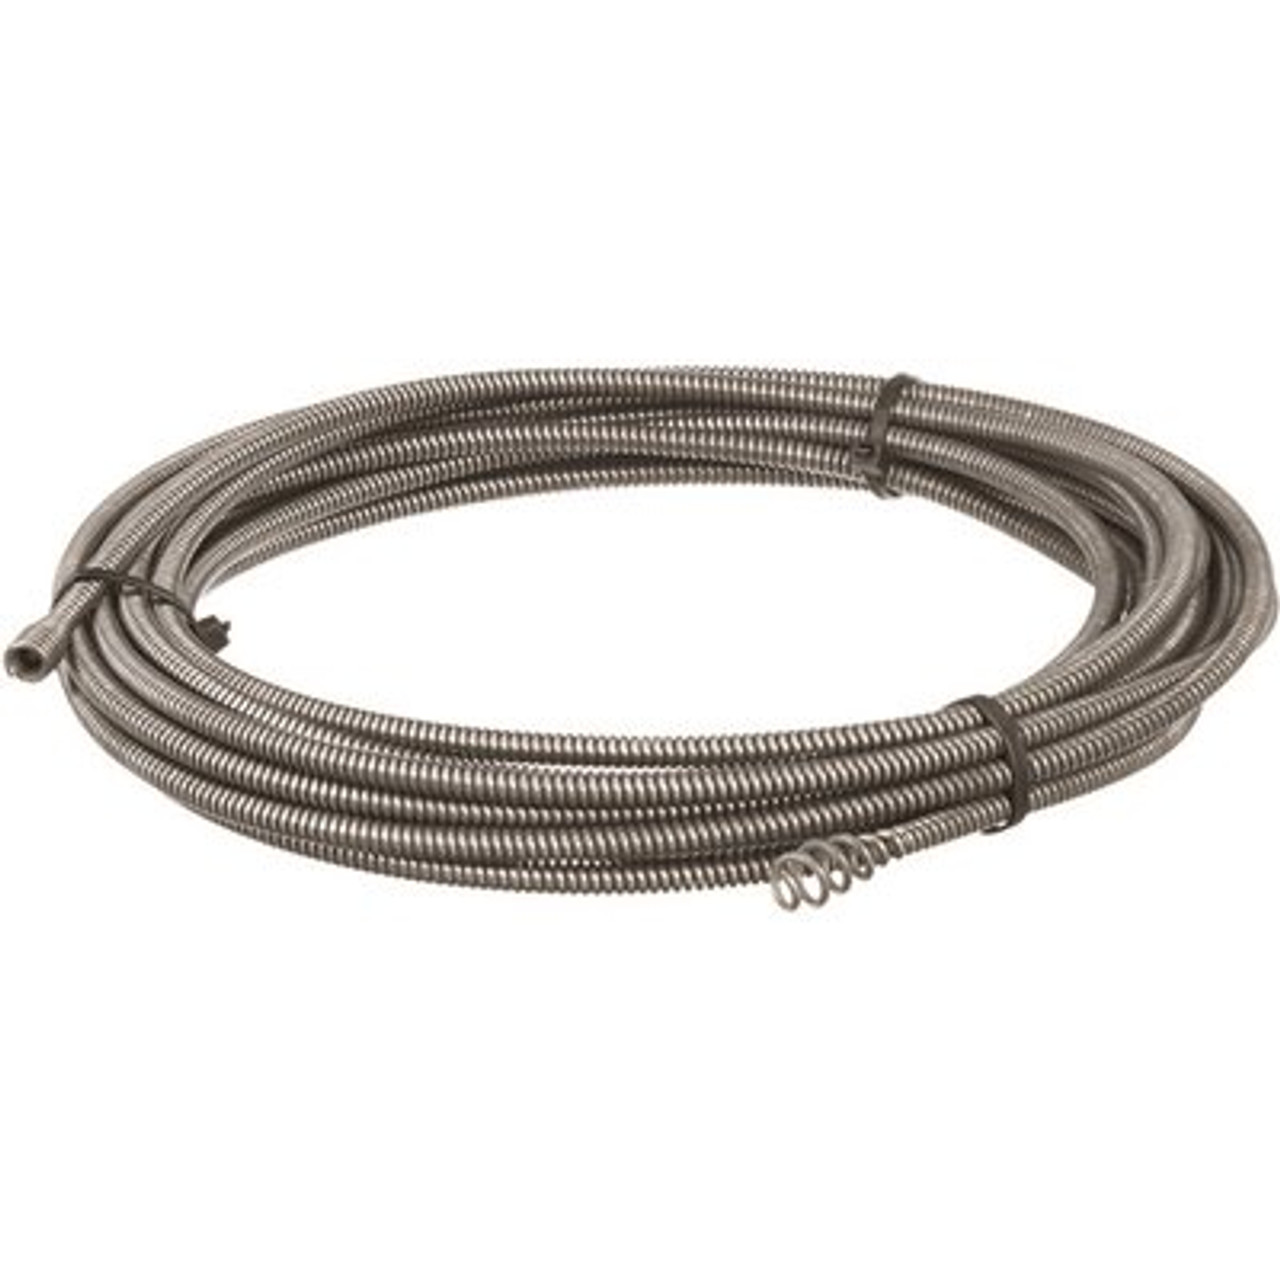 RIDGID 1/4 in. x 30 ft. C-1 IC Inner Core Drain Cleaning Snake Auger Machine Replacement Cable for PowerClear Drain Cleaner